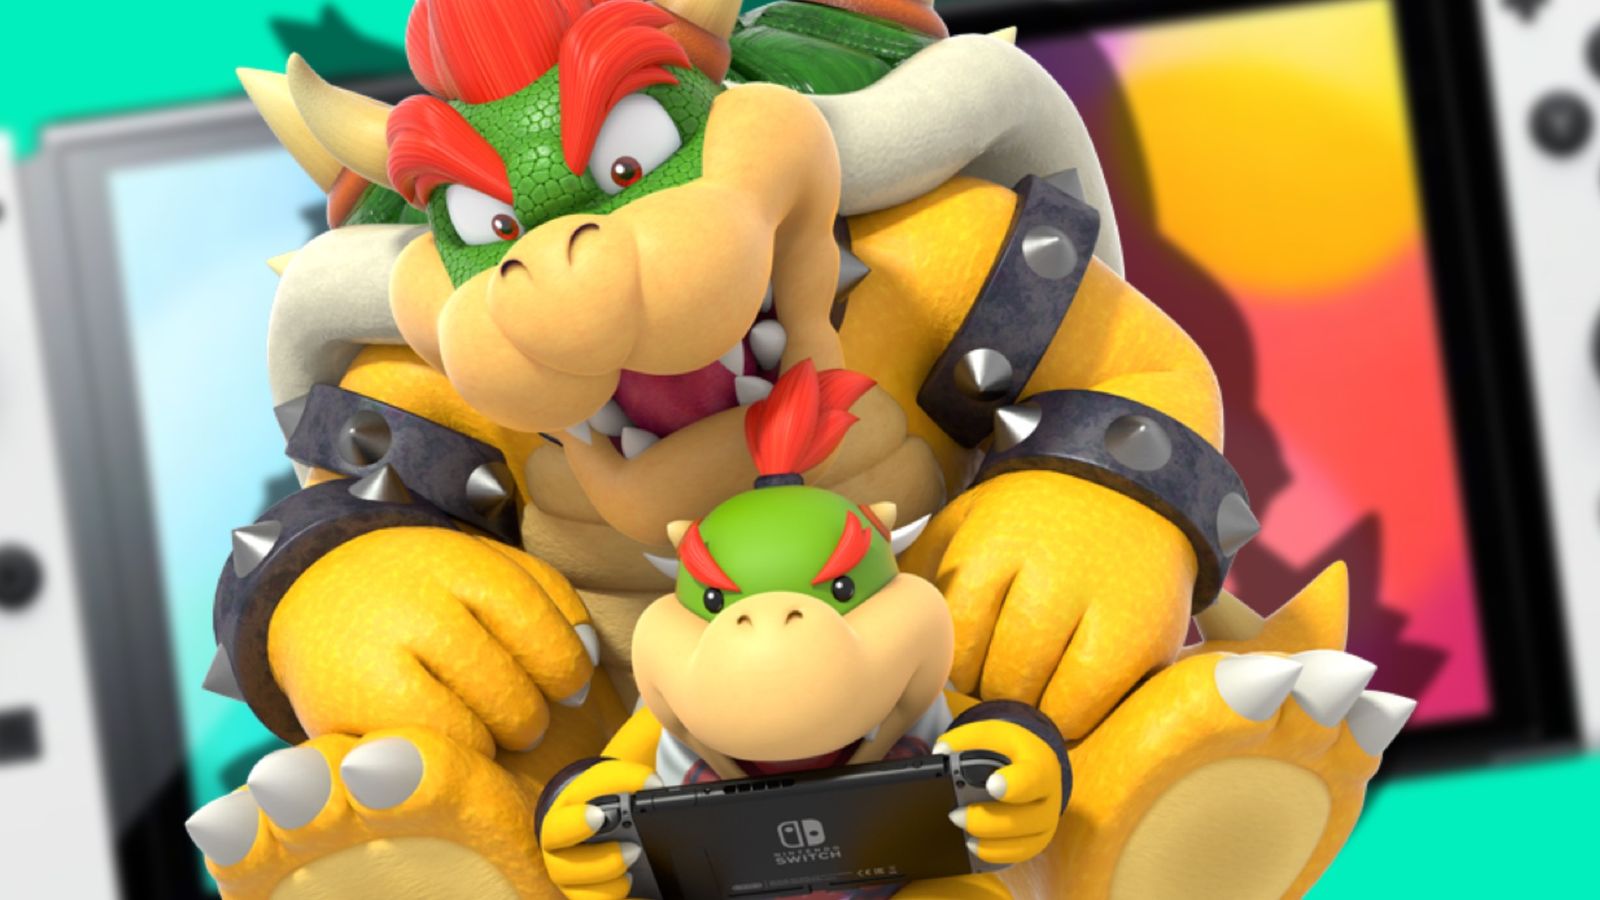 How to merge Nintendo accounts with bowser and bowser jr playing on Nintendo Switch